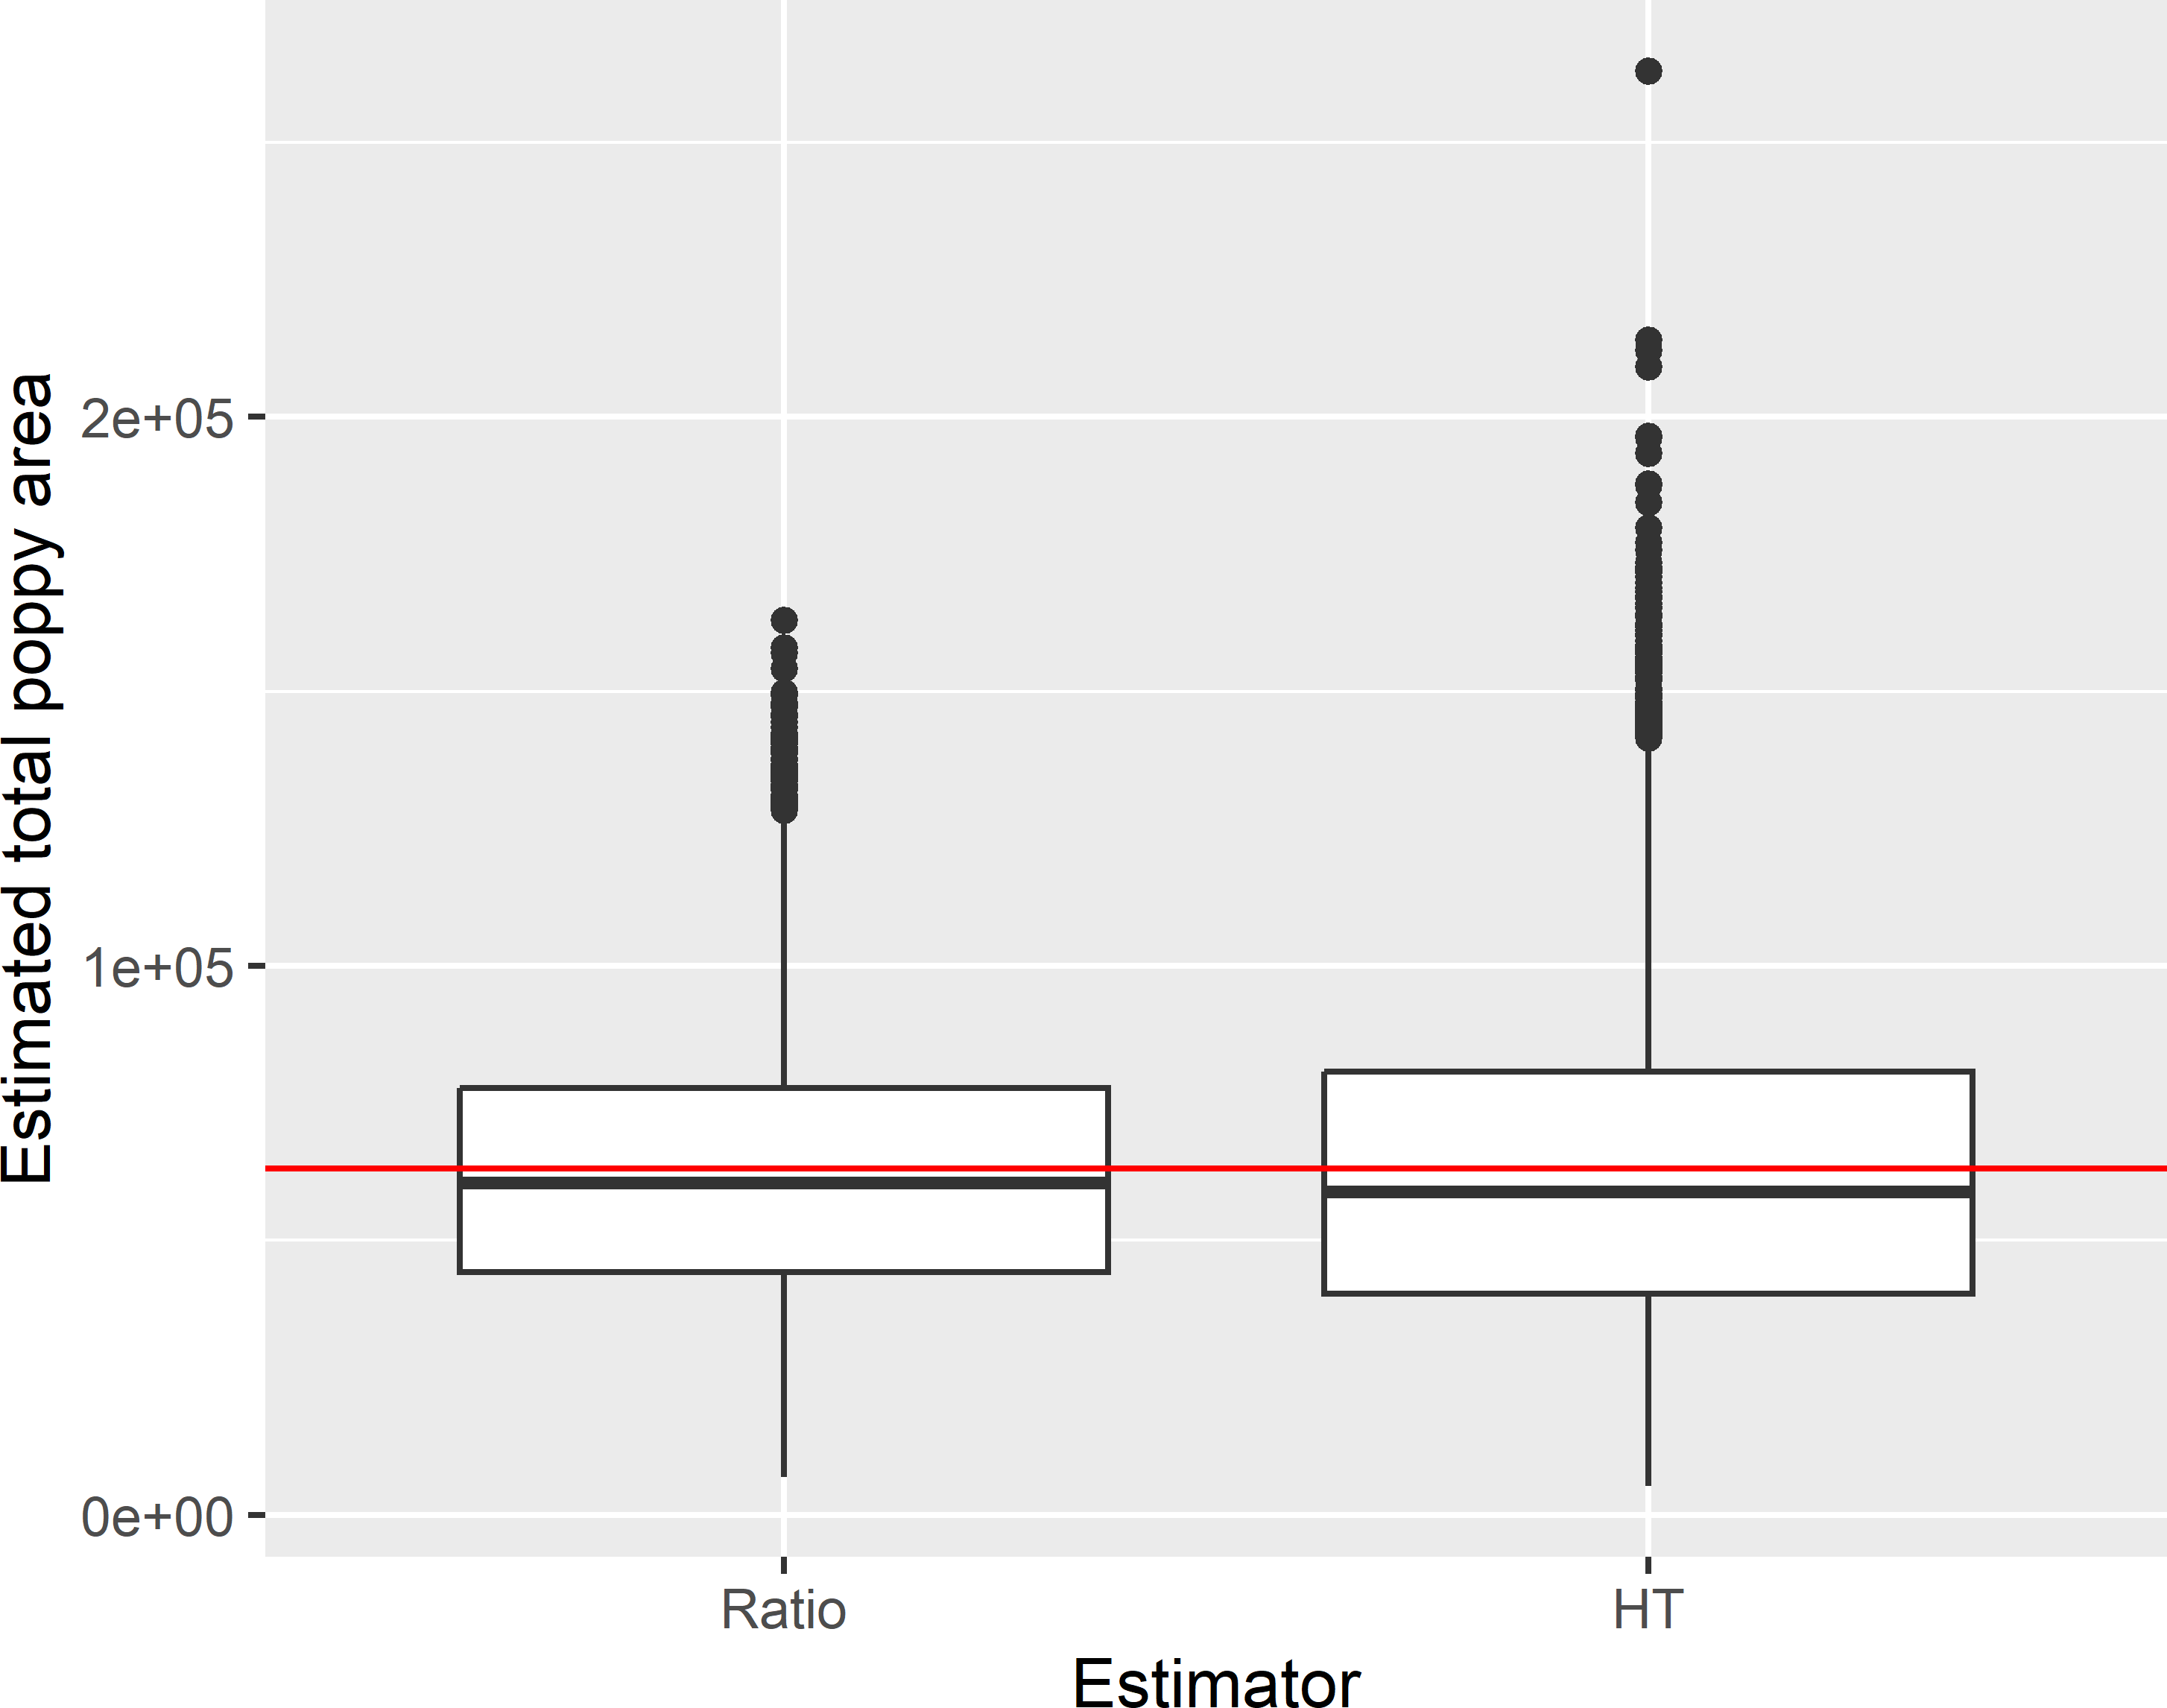 Approximated sampling distribution of the ratio estimator (Ratio) and the \(\pi\) estimator (HT) of the total poppy area (ha) in Kandahar with simple random sampling without replacement of size 50.